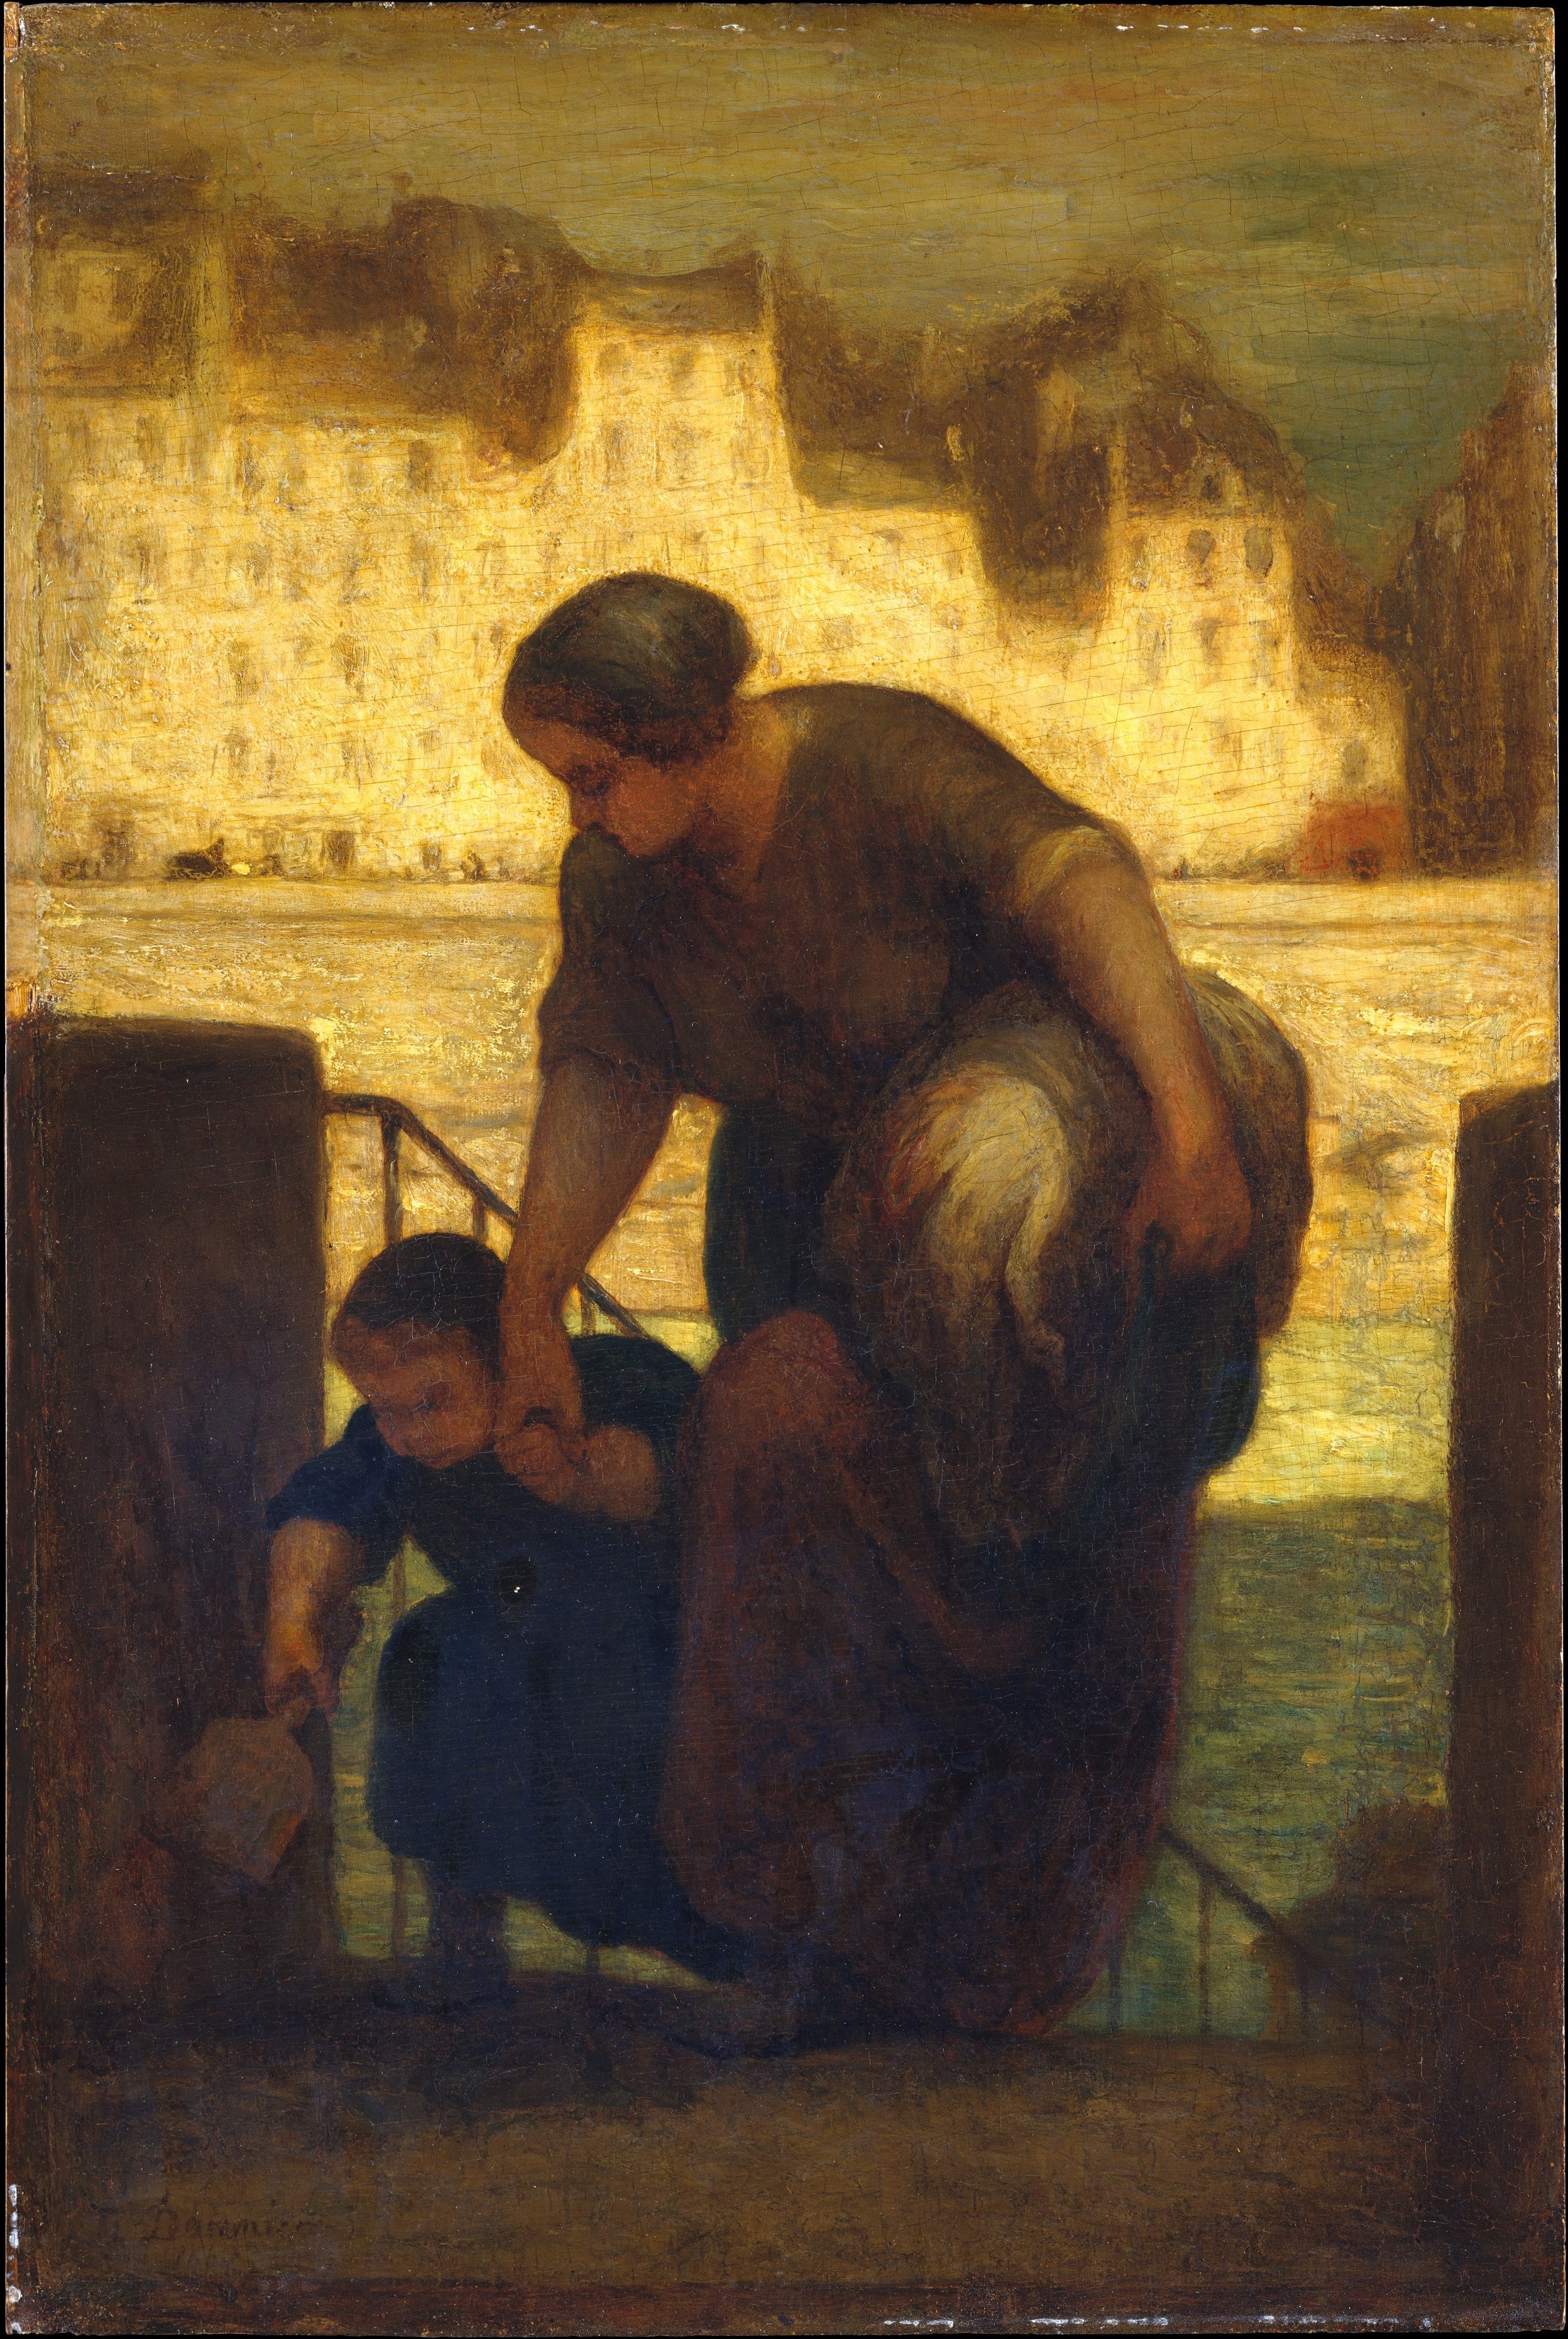 Photo of "The Laundress" a realist painting by Daumier to illustrate the Orsay Museum guided tour 